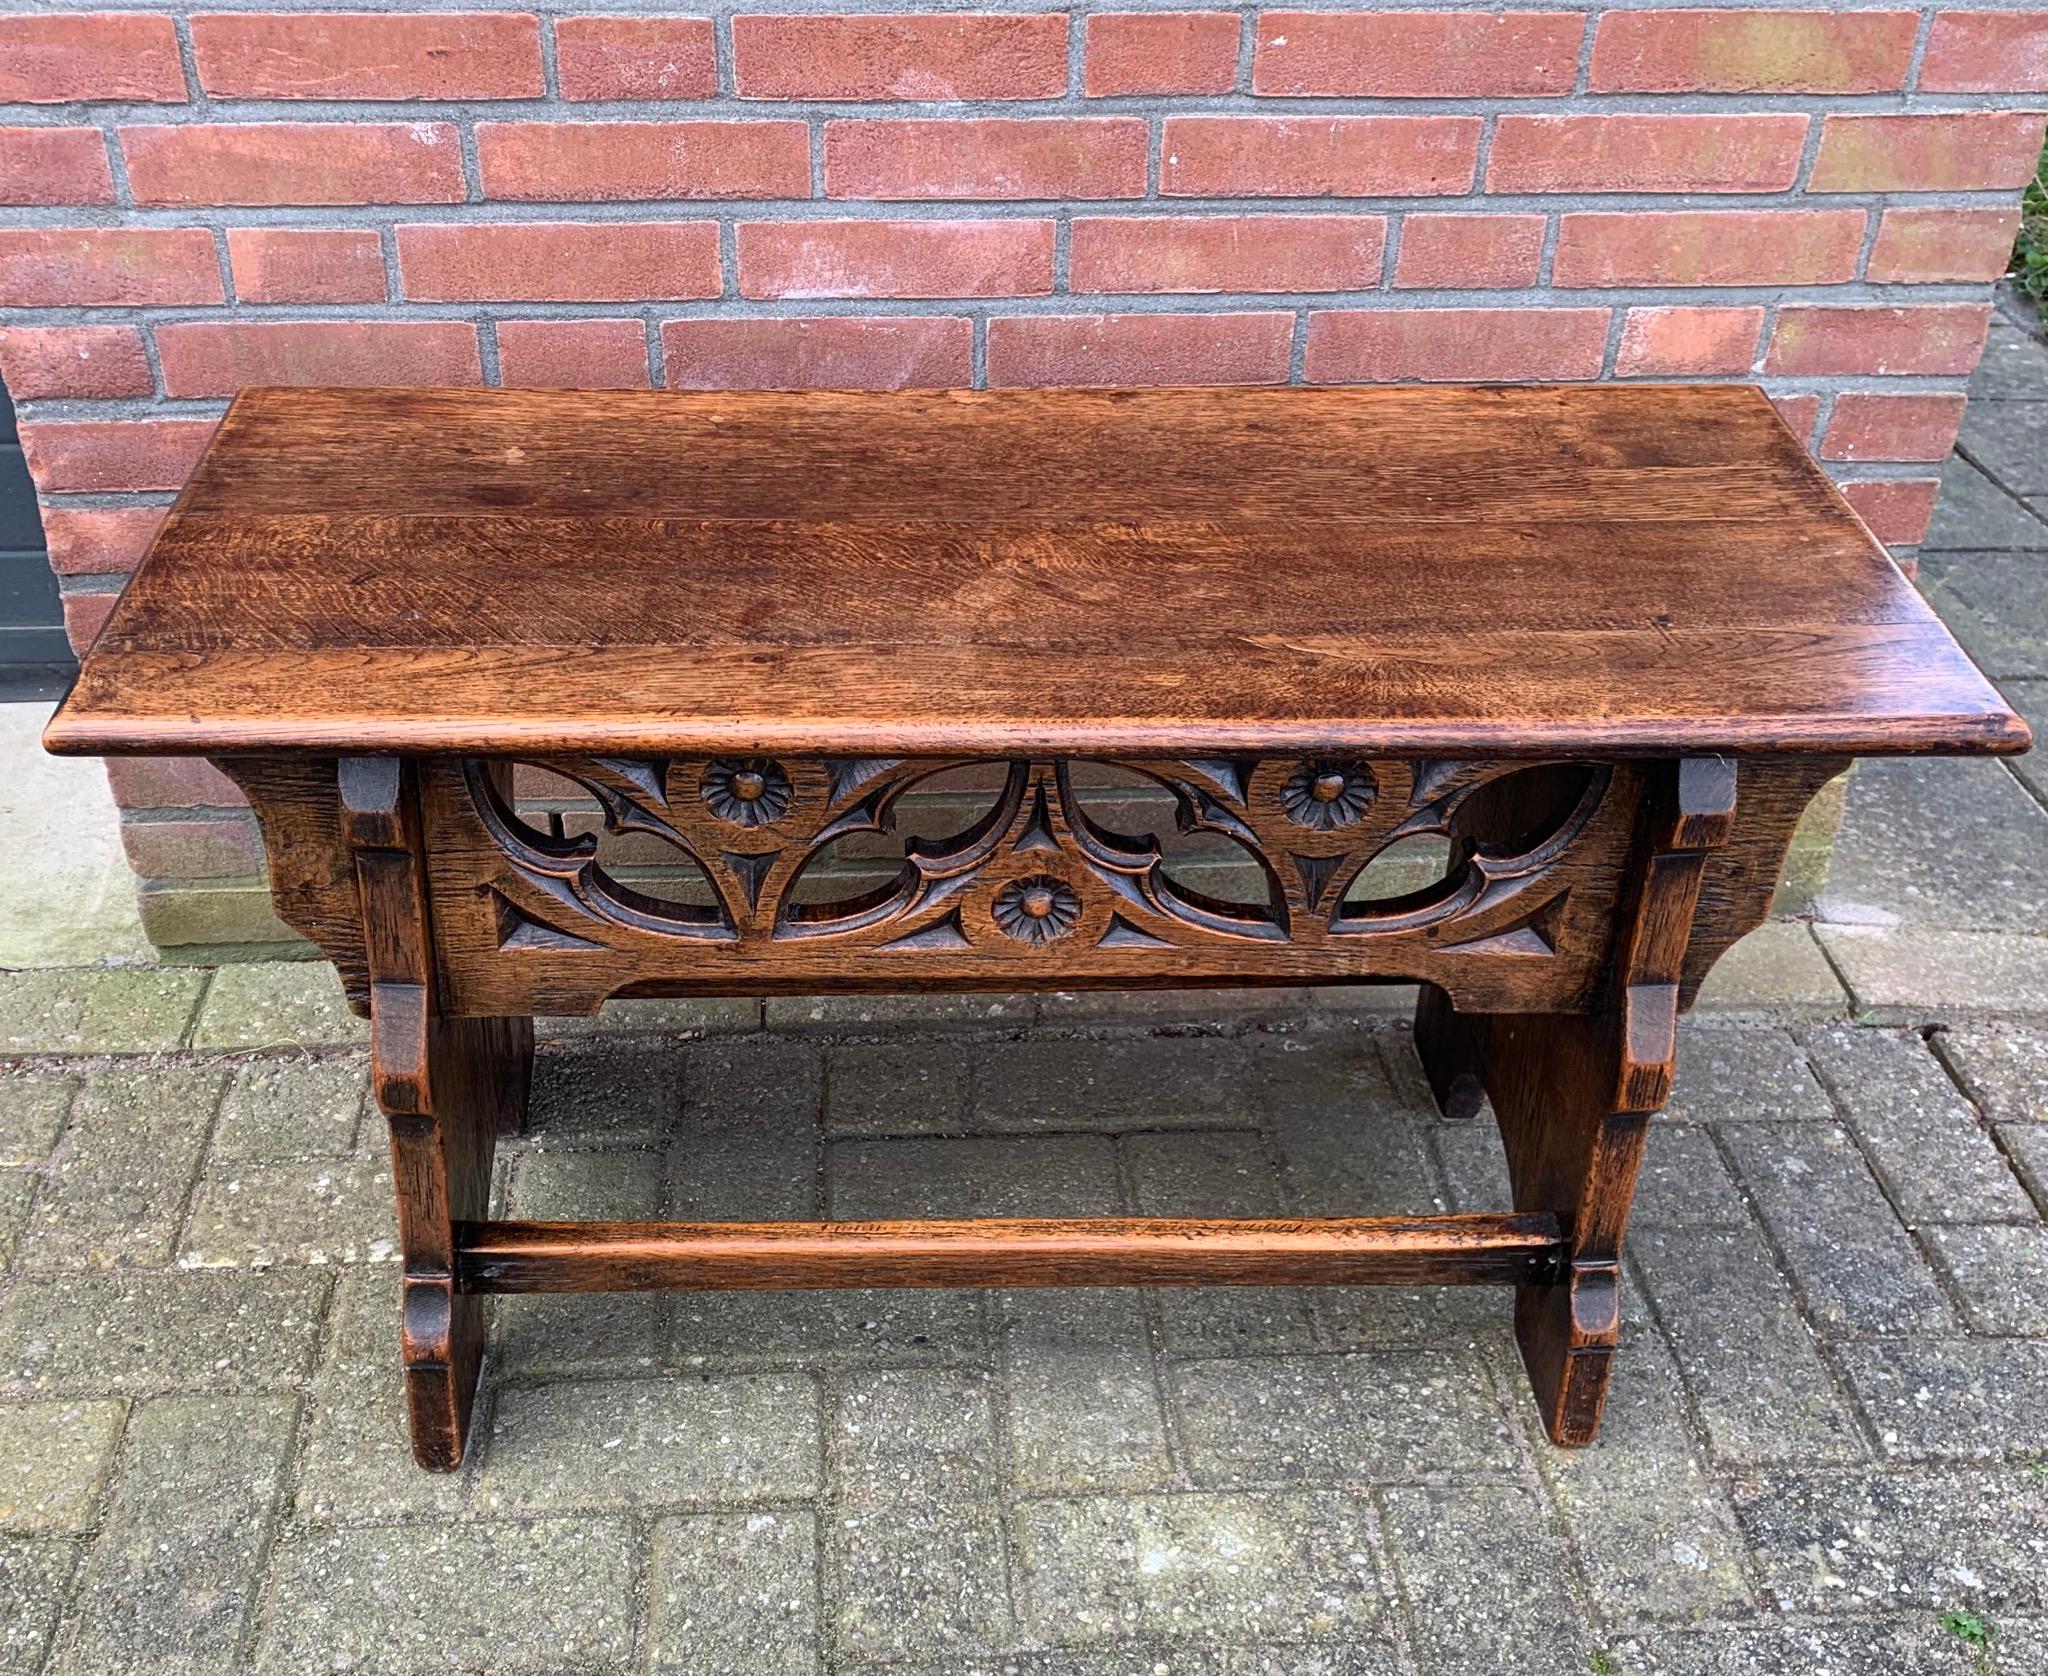 Antique Early 1900s Gothic Revival Stool or Table with Hand Carved Elements For Sale 9